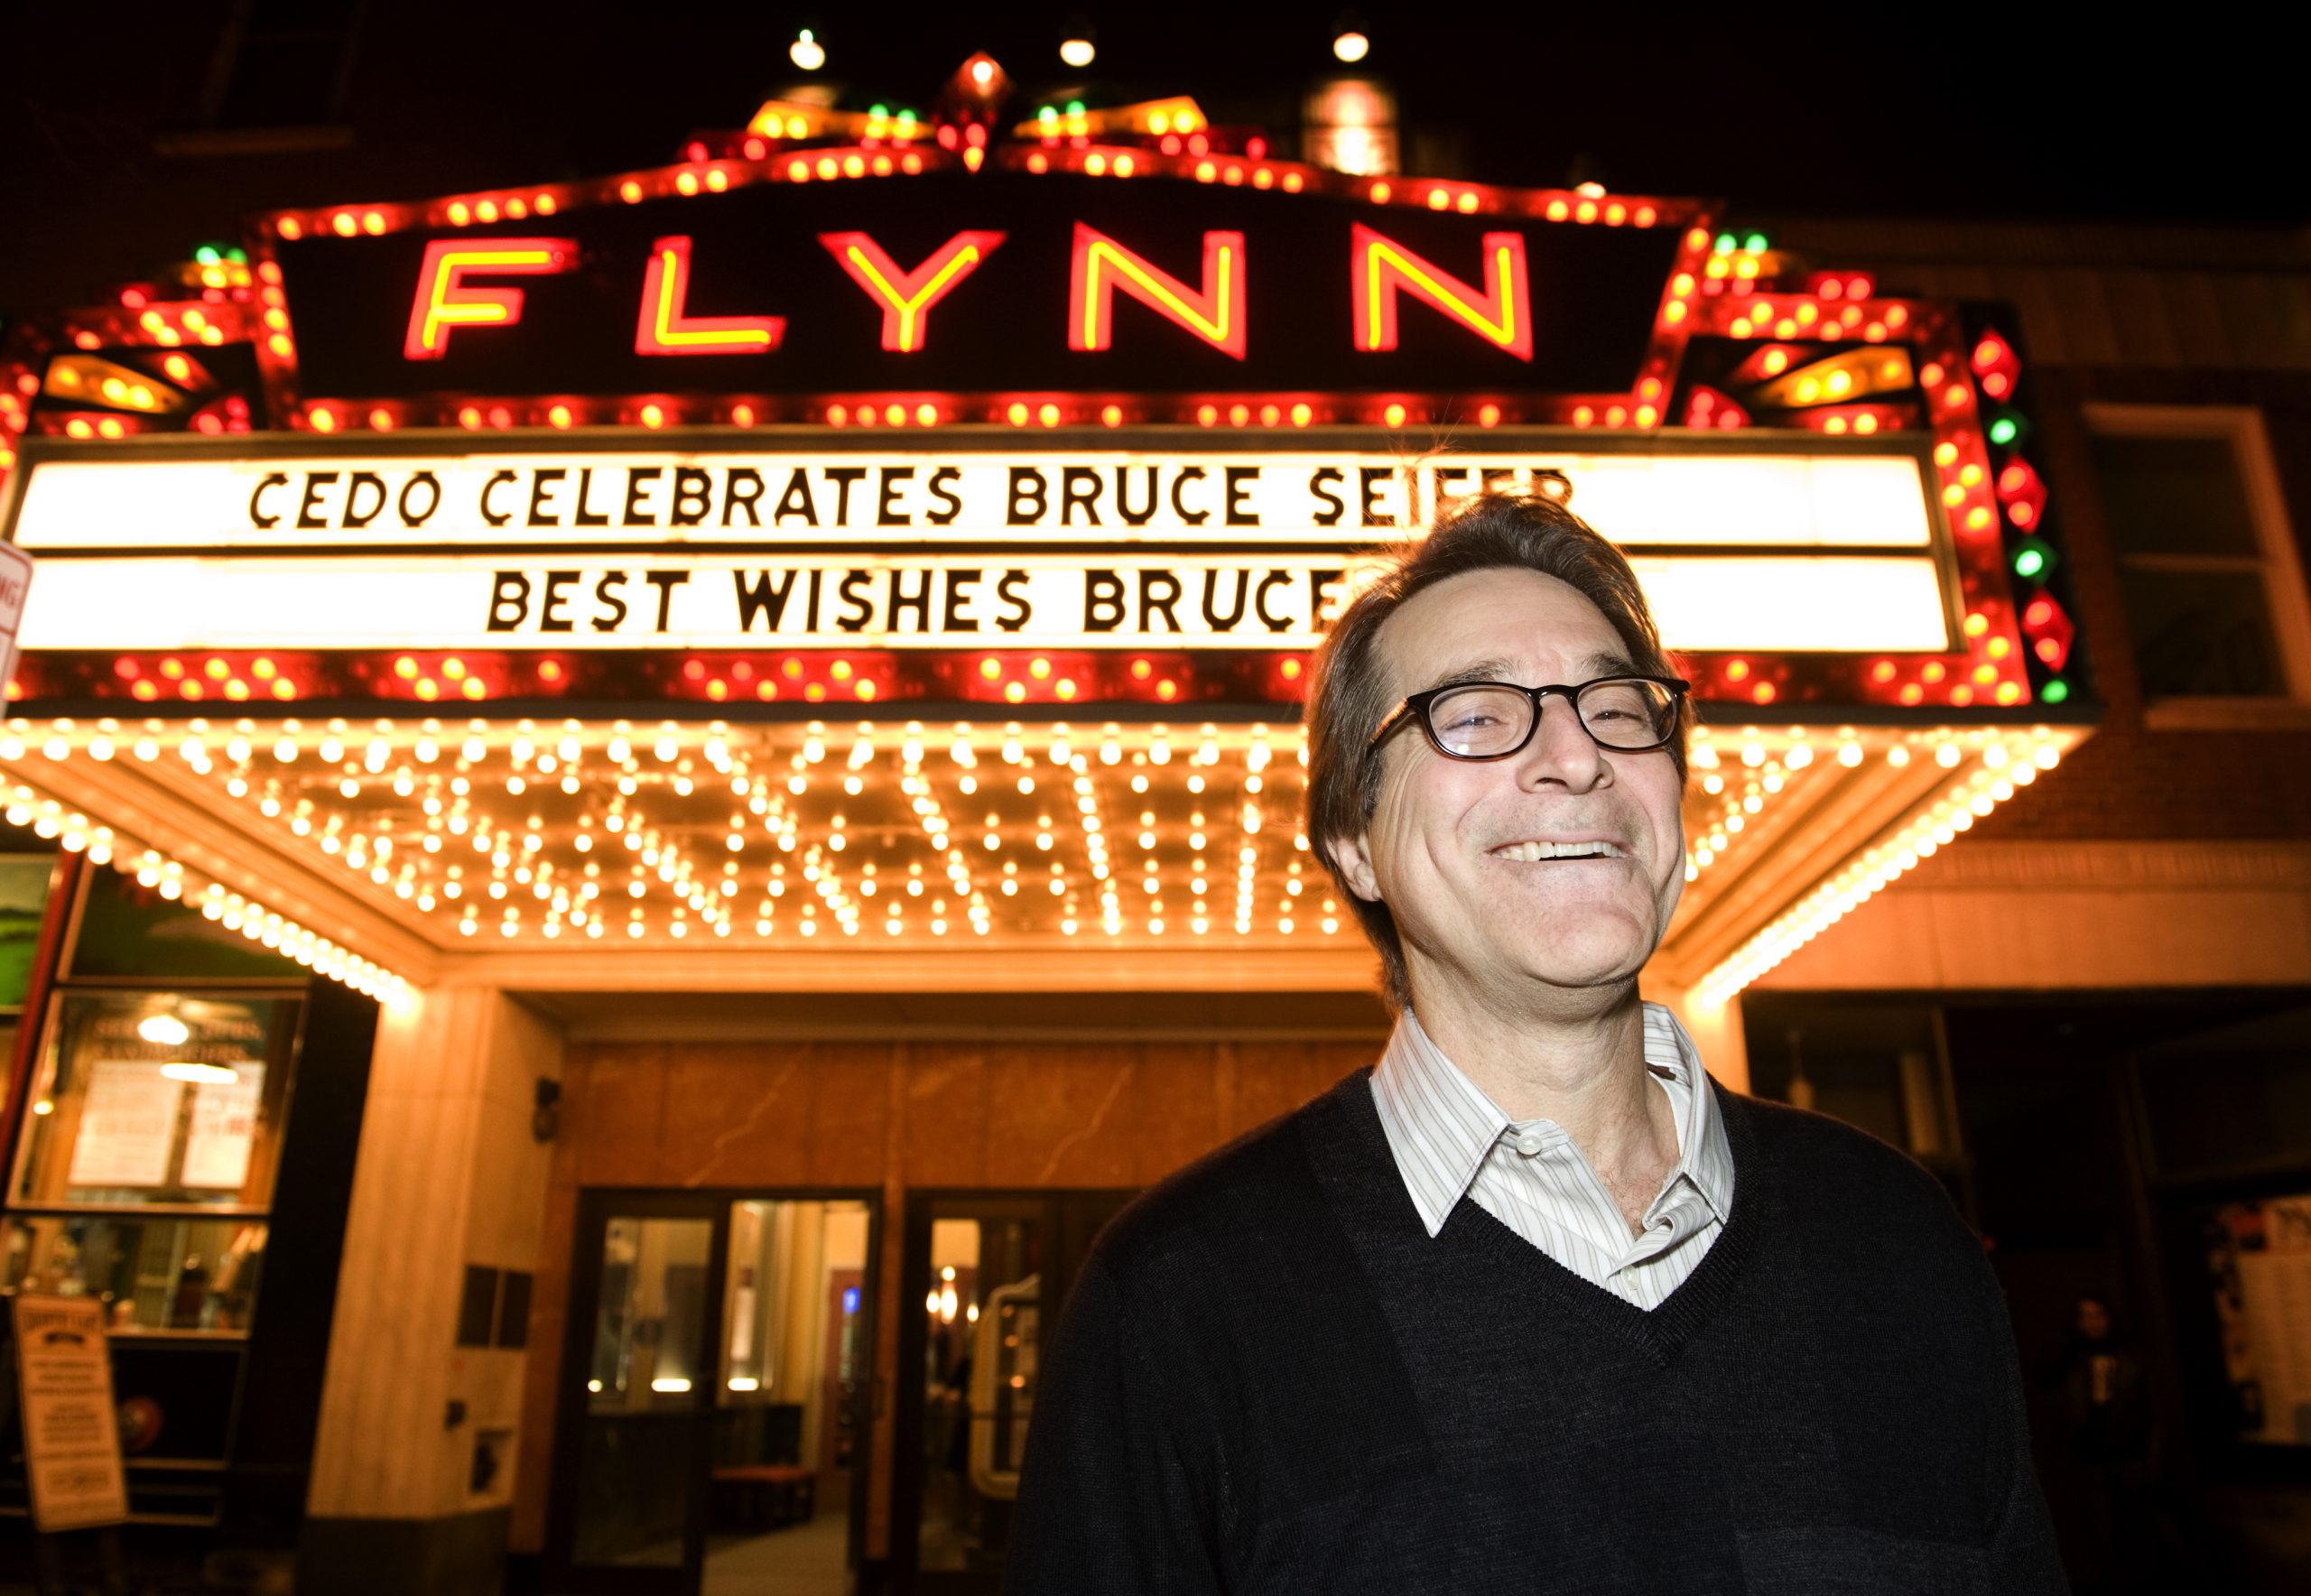 Famed Economic Development Professional Bruce Siefer in front of the marquee for the Flynn Theatre, downtown Burlington, VT. Full color photo taken at night. 